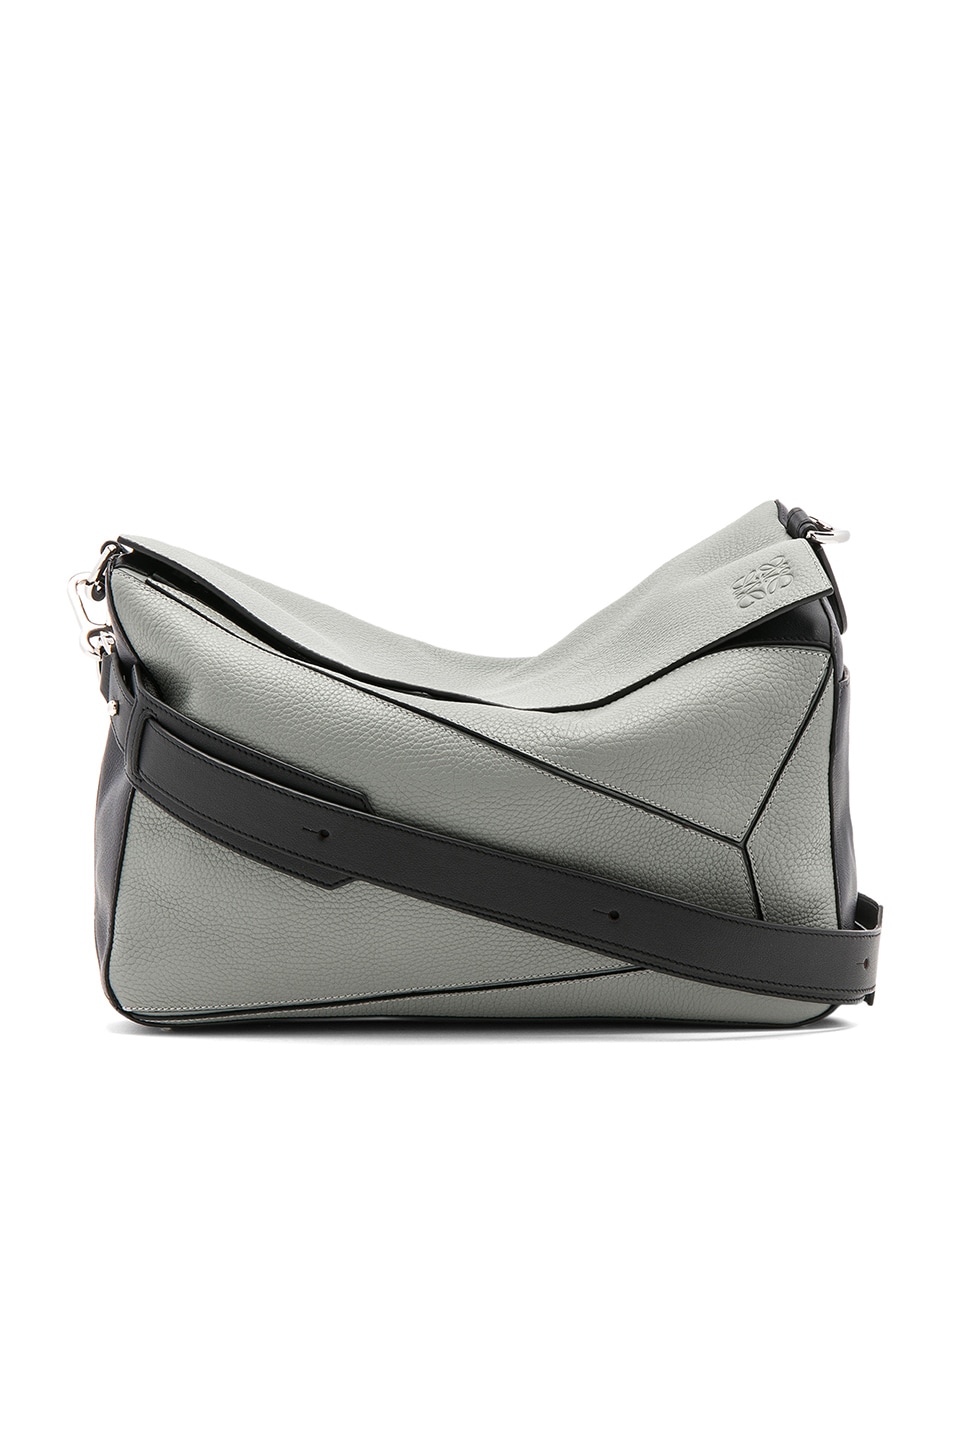 Image 1 of Loewe XL Leather Puzzle Bag in Grey Multi